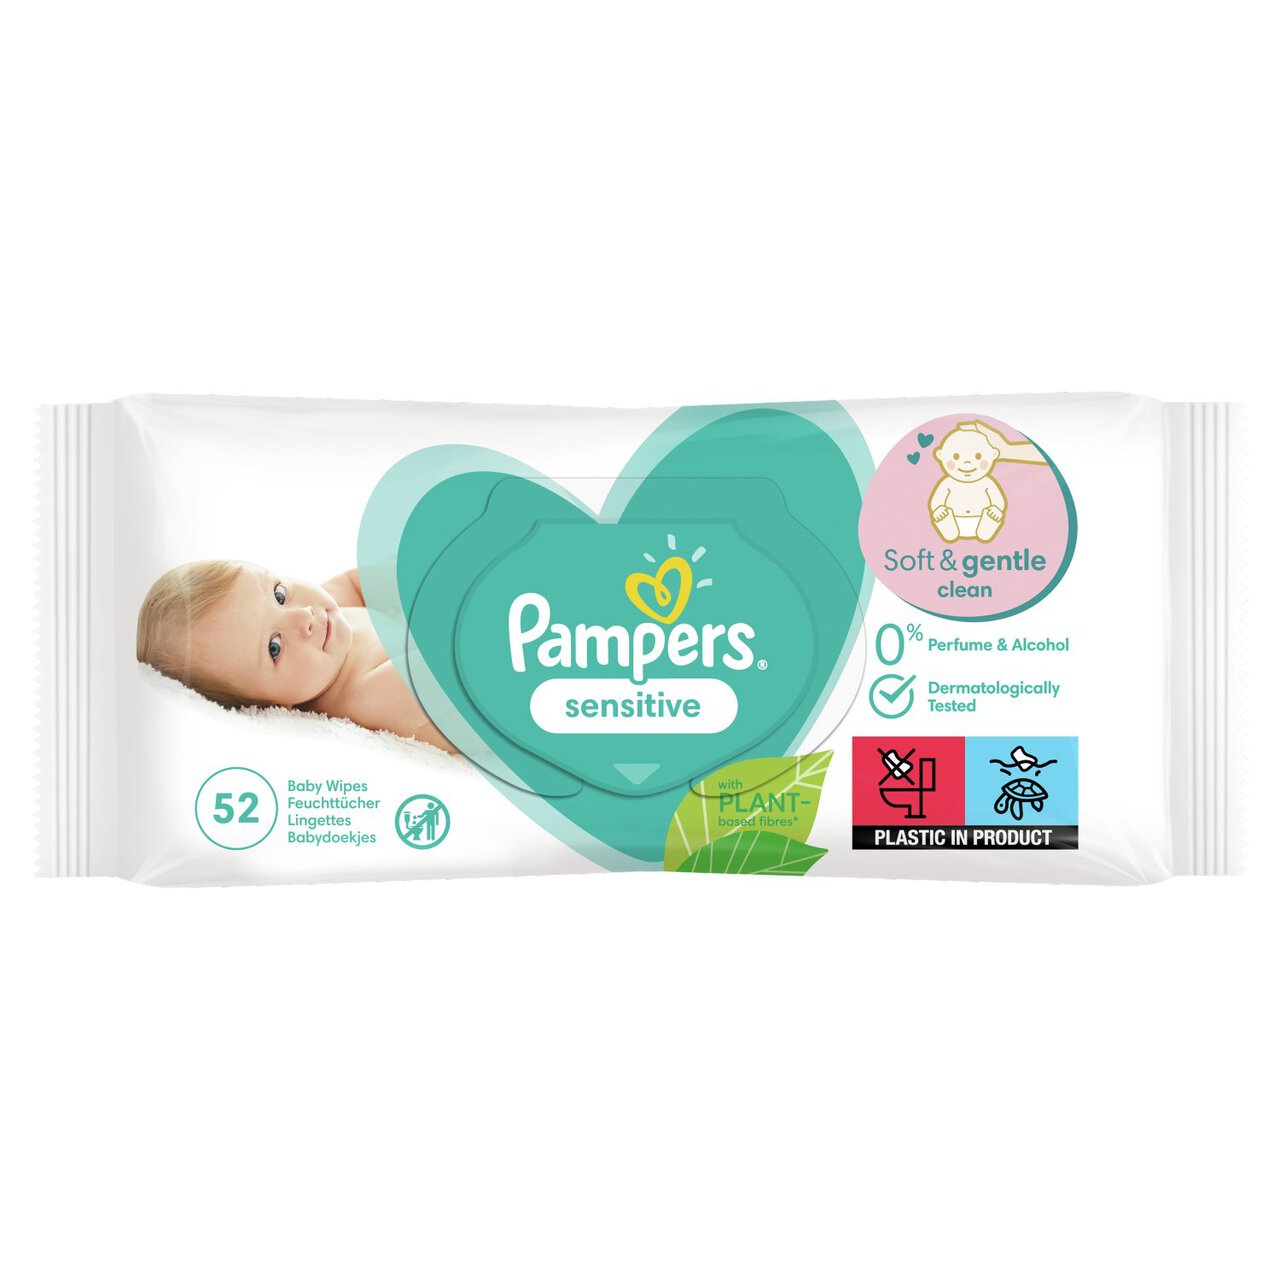 Pampers Sensitive Baby Wipes x 52 52 per pack